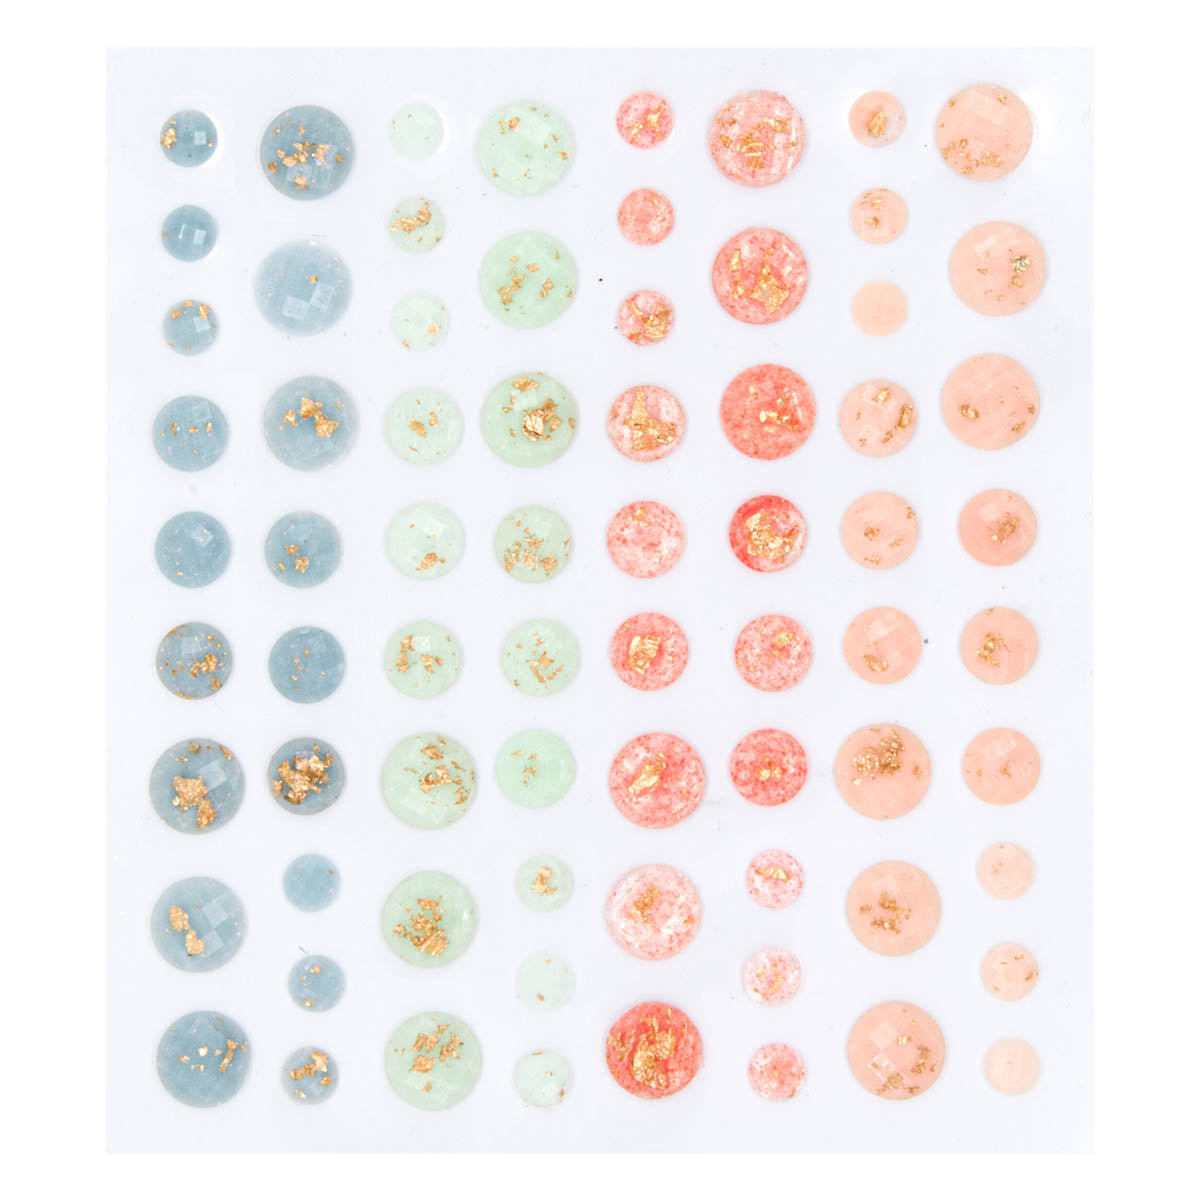 Spellbinders - Gold Flecked Gemstones from the Serenade of Autumn Collection